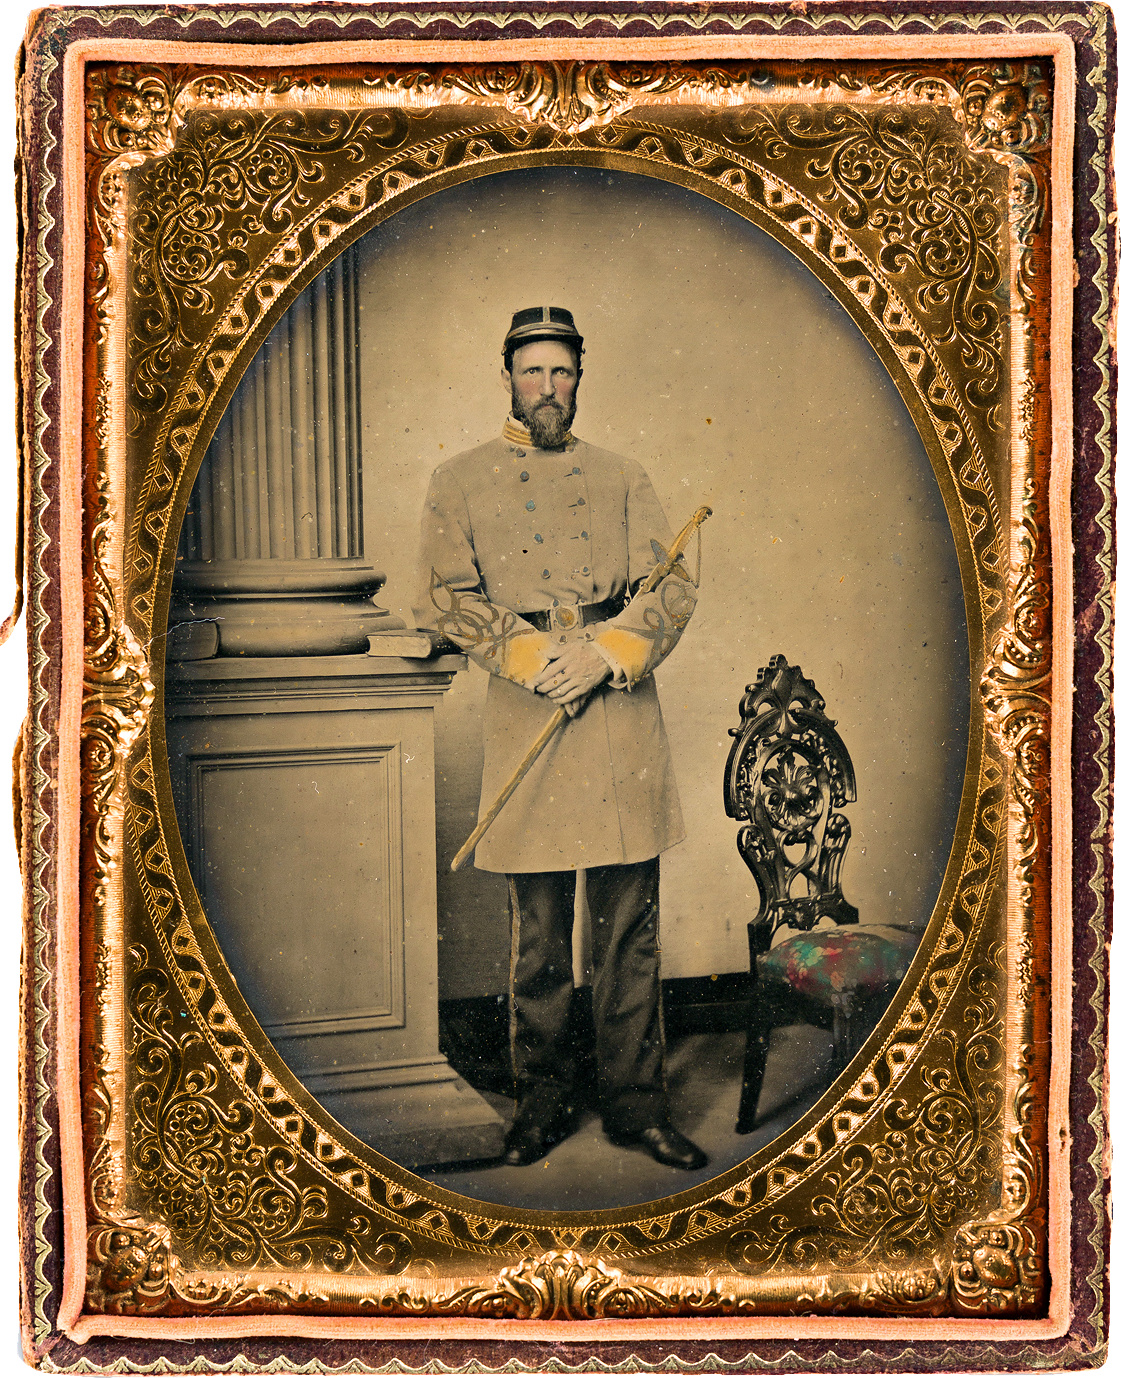 Half-plate ambrotype of Confederate officer Captain William F. McRorie of Co. A, 4th North Carolina Infantry Regiment, Richmond, Virginia.—C. R. Rees & Co.